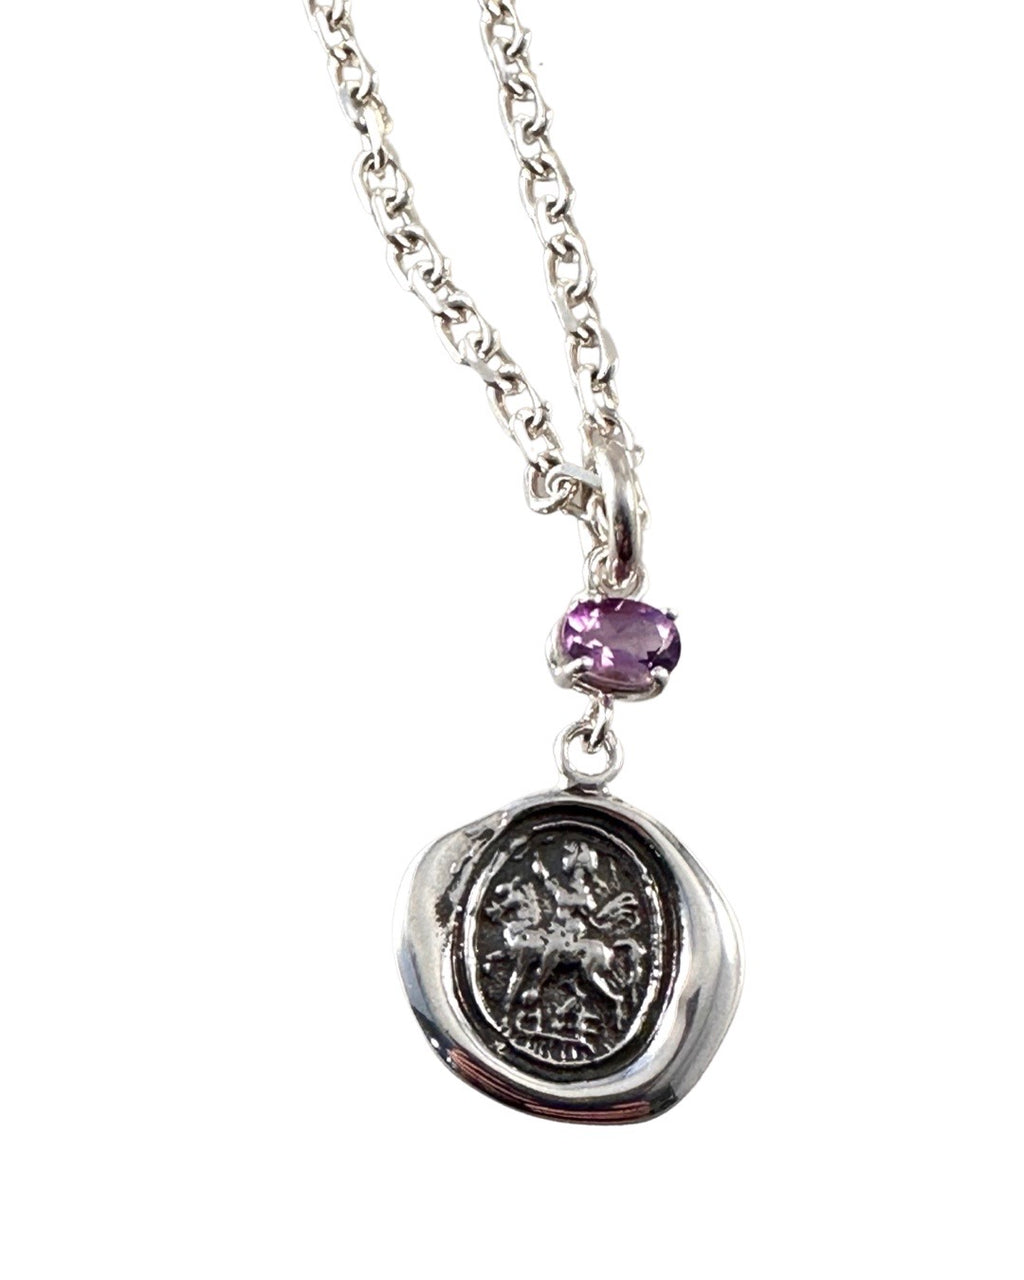 18" Sterling Silver Saint George Crest Necklace with Amethyst